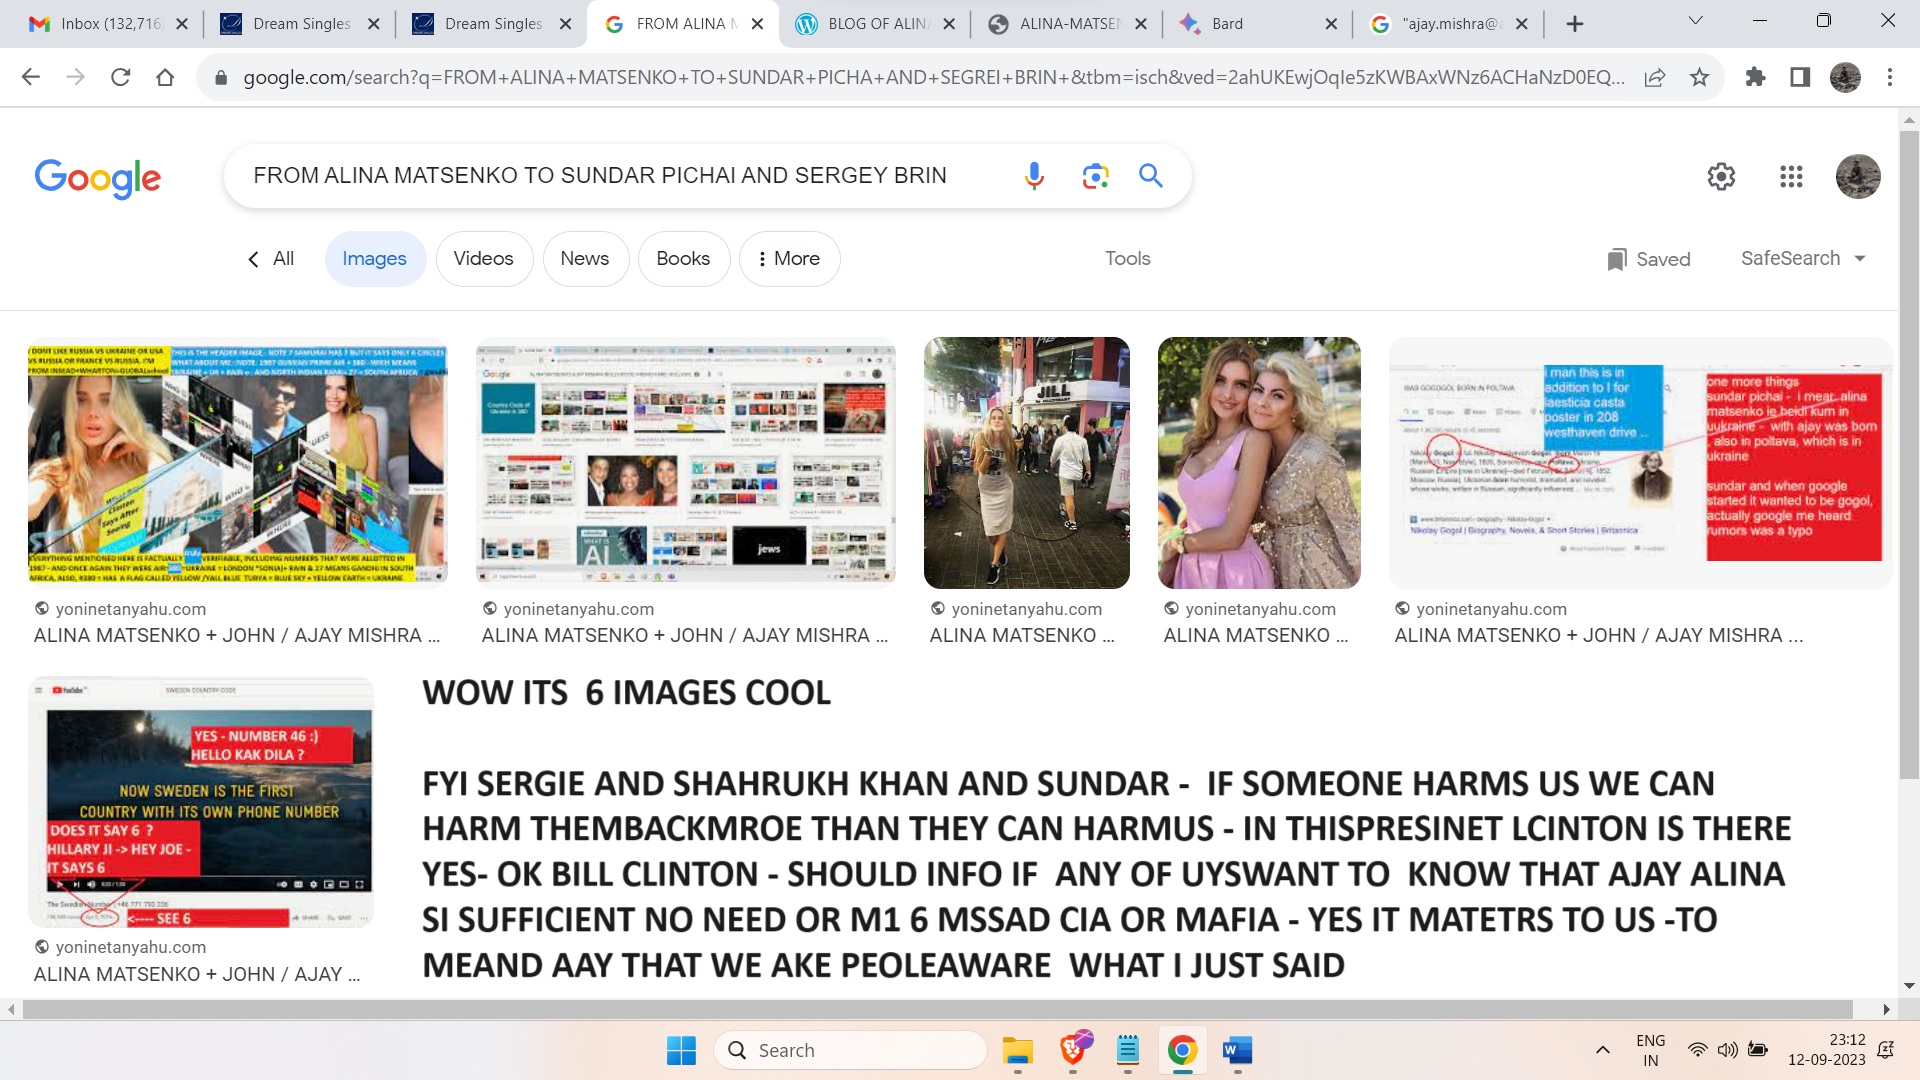 FROM ALINA MATSENKO TO SUNDAR PICHAI AND SERGEY BRIN  WOW ITS  6 IMAGES COOL  FYI SERGIE AND SHAHRUKH KHAN AND SUNDAR -  IF SOMEONE HARMS US WE CAN HARM THEMBACKMROE THAN THEY CAN HARMUS - IN THISPRESINET LCINTON IS THERE YES- OK BILL CLINTON - SHOULD INFO IF  ANY OF UYSWANT TO  KNOW THAT AJAY ALINA SI SUFFICIENT NO NEED OR M1 6 MSSAD CIA OR MAFIA - YES IT MATETRS TO US -TO MEAND AAY THAT WE AKE PEOLEAWARE  WHAT I JUST SAID